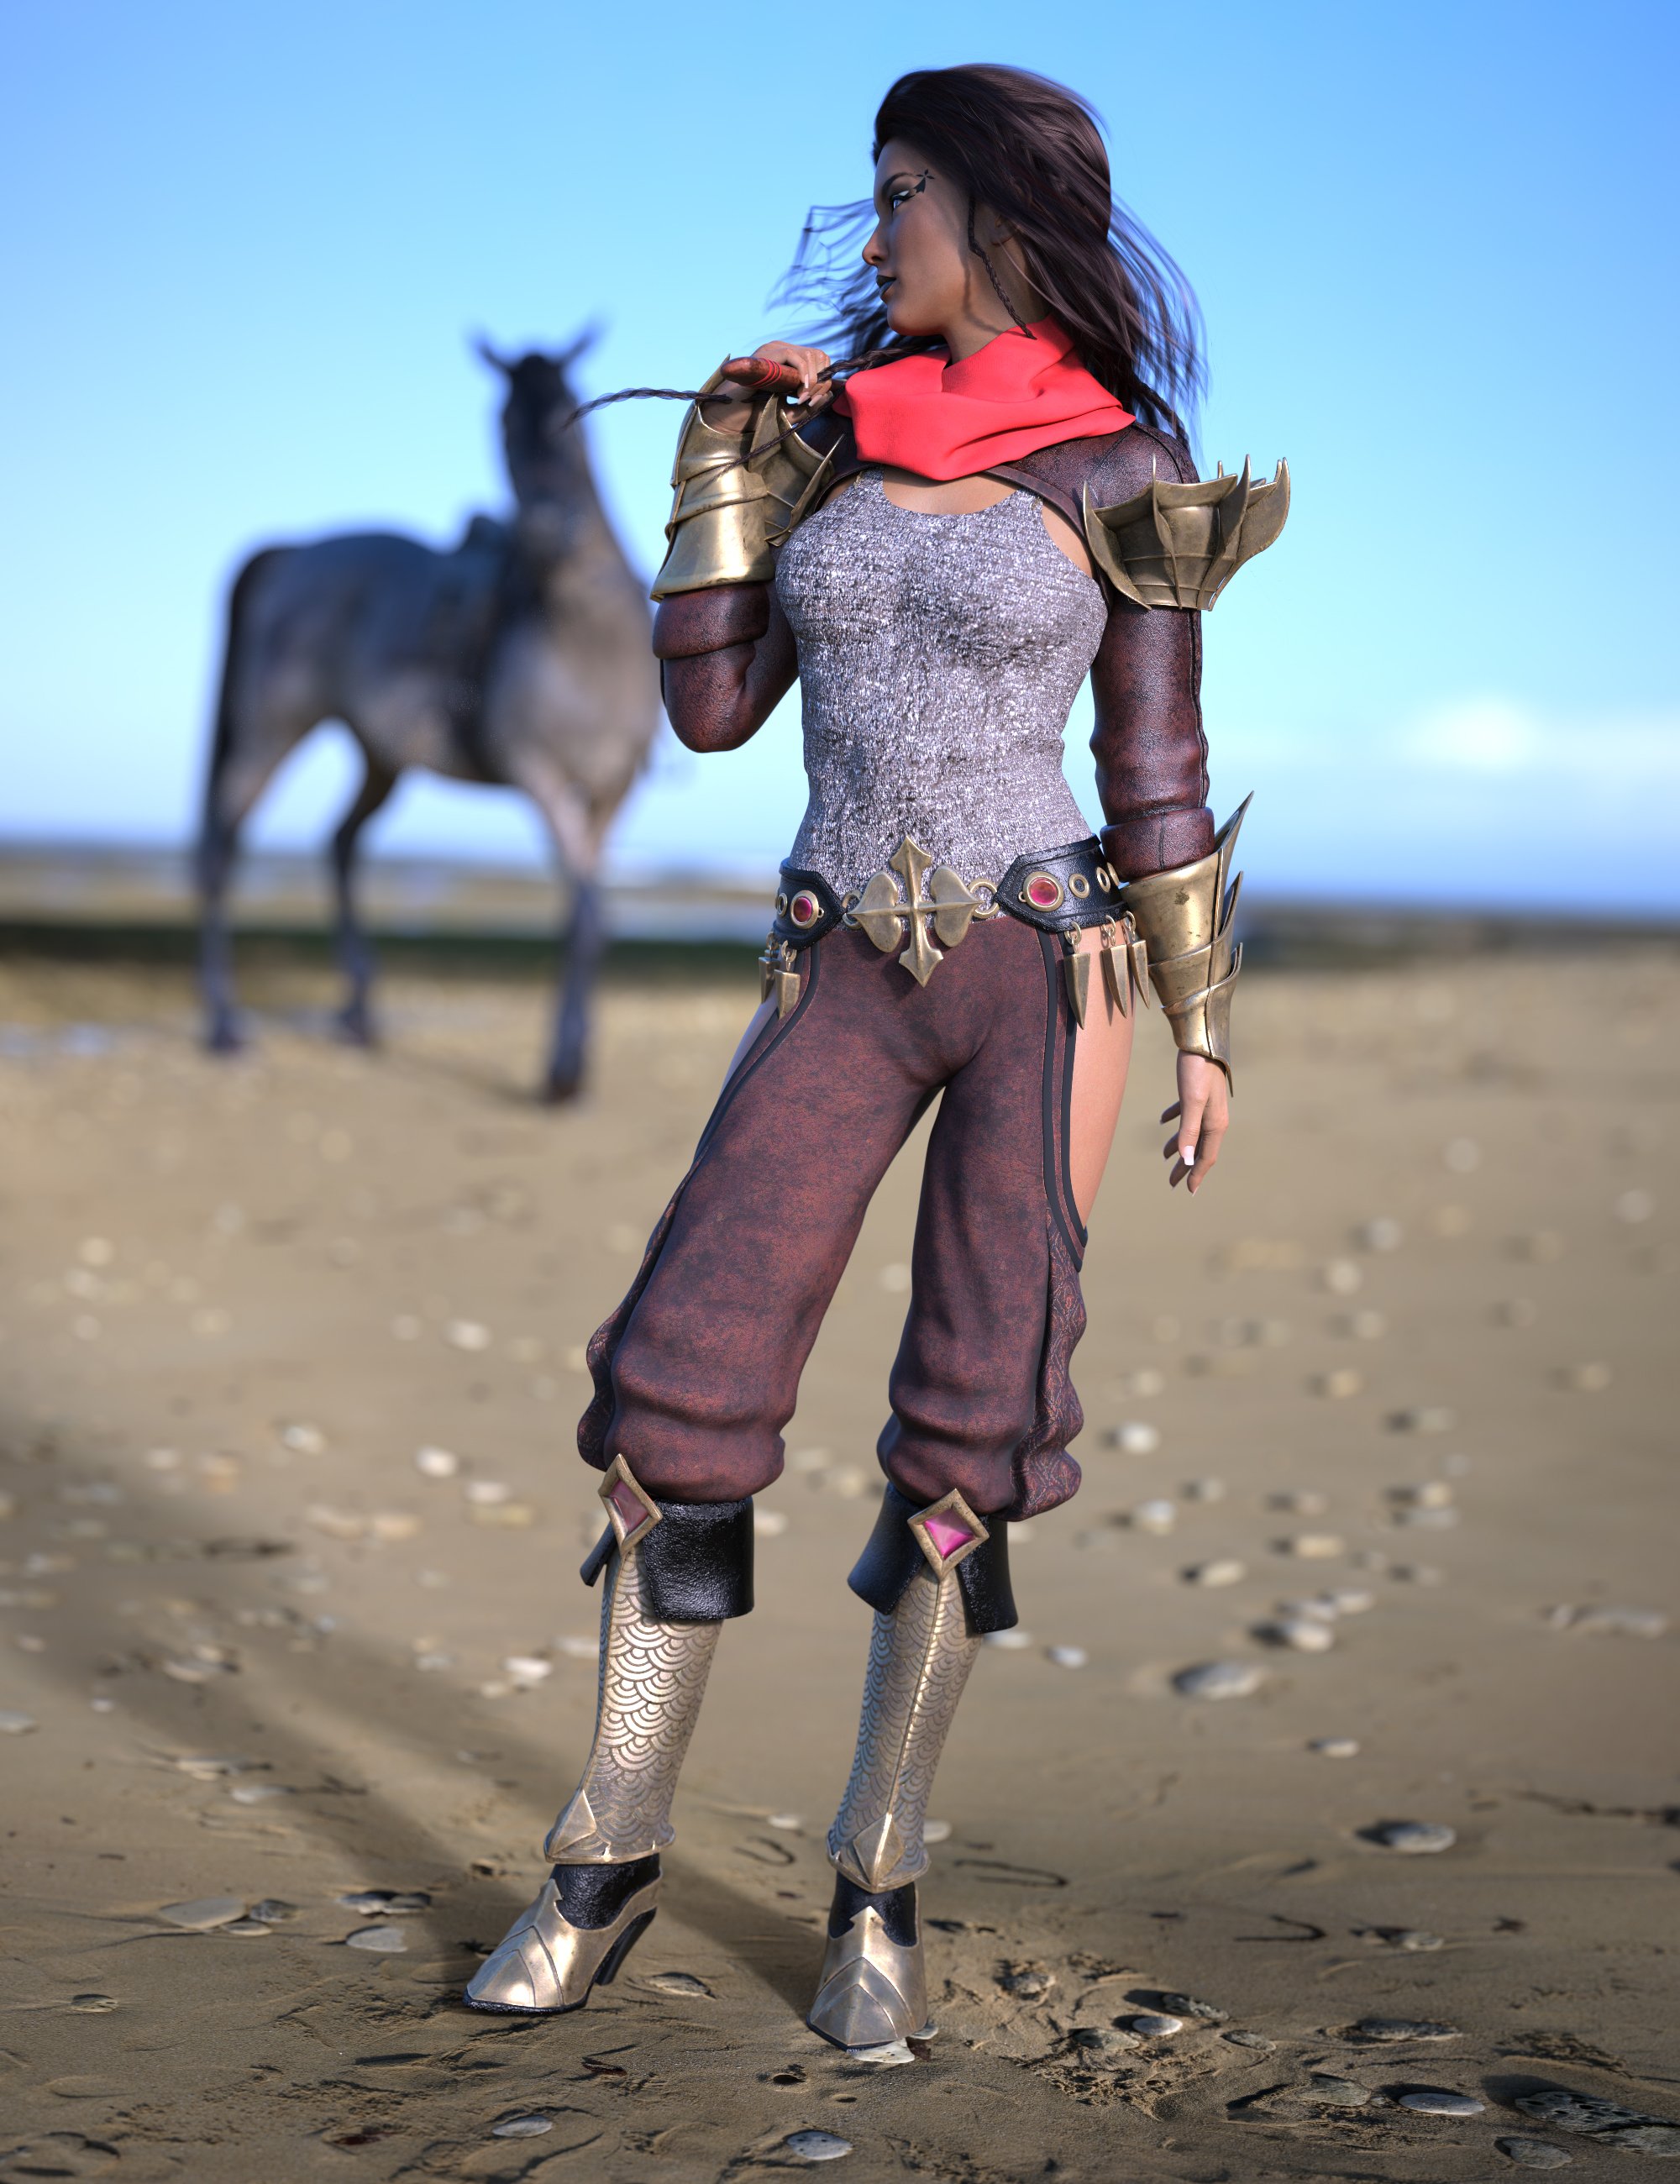 Eastern Warrior for Genesis 8 Female(s) by: Bluebird 3dMoonscape GraphicsRavenhairSade, 3D Models by Daz 3D